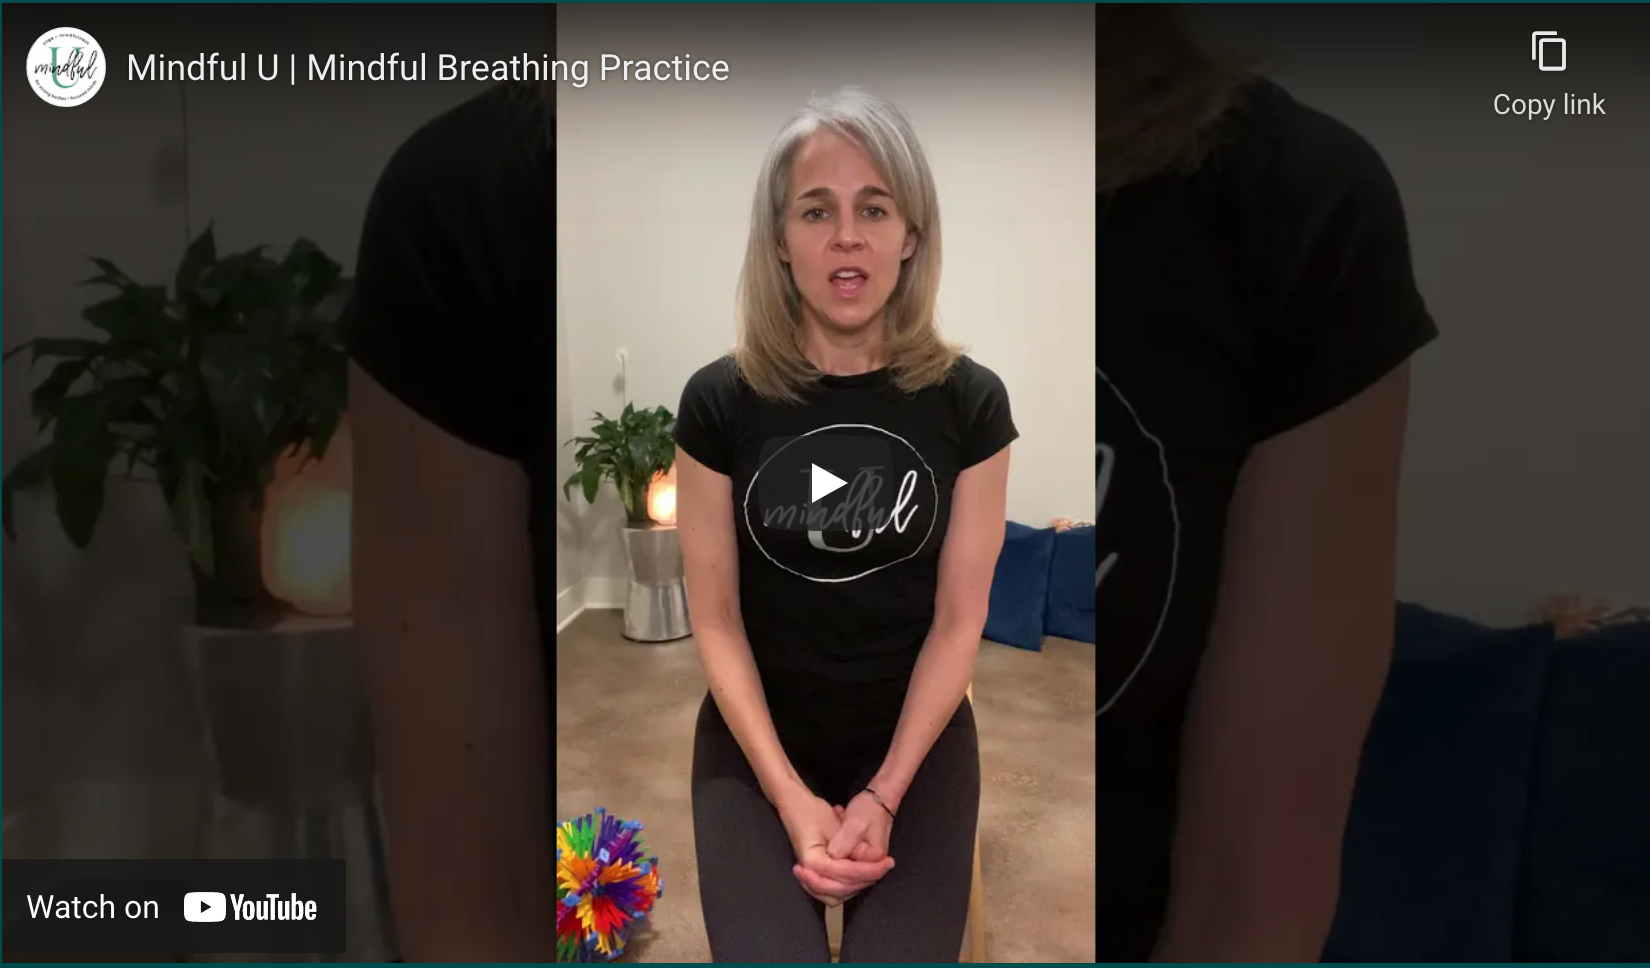 Mindful Breathing Practice